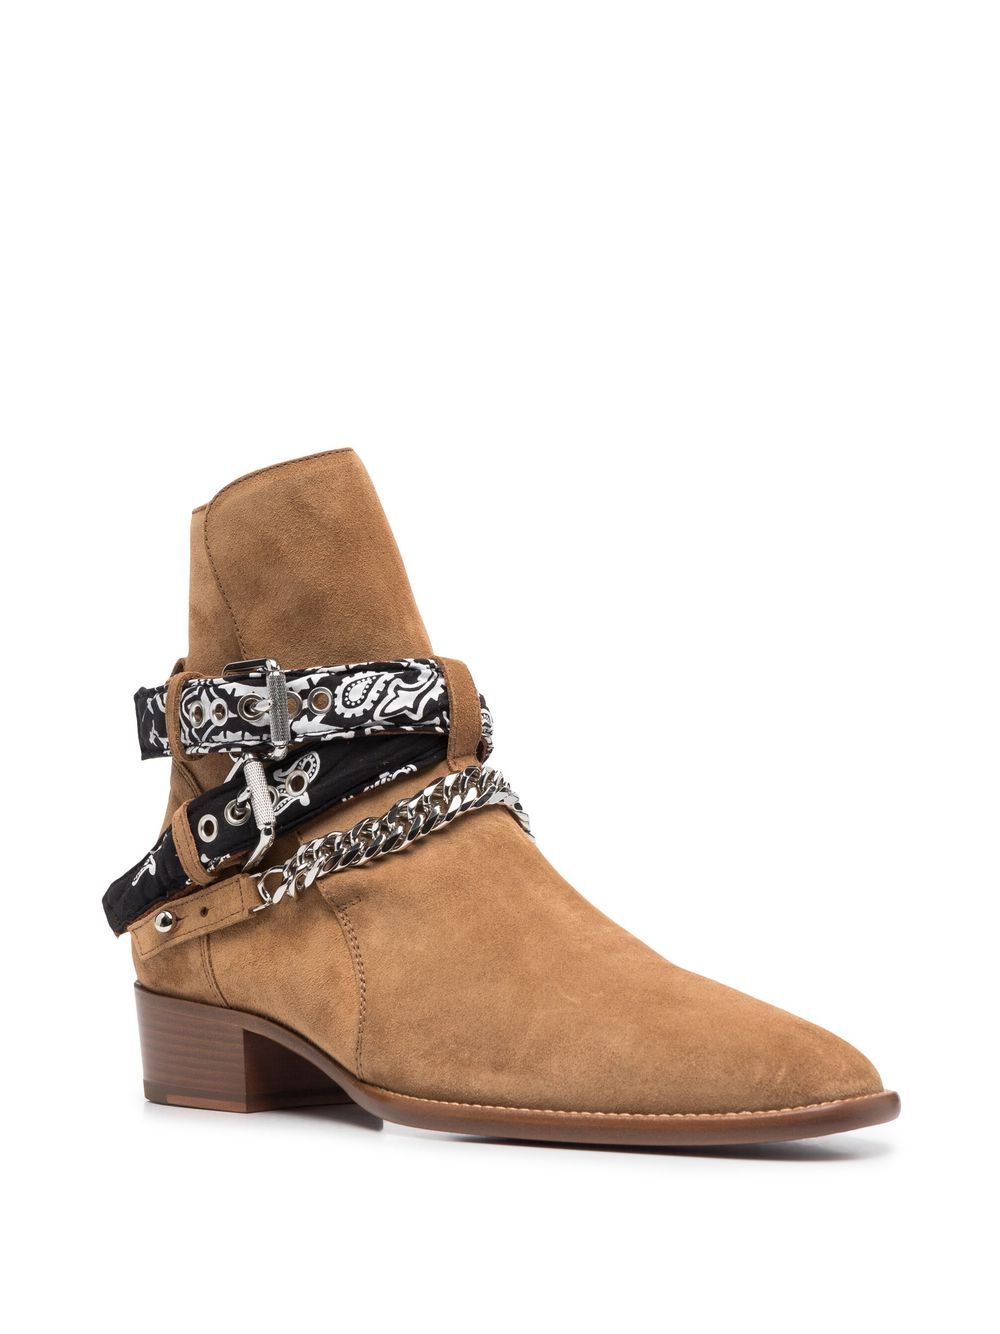 bandana-trimmed ankle boots